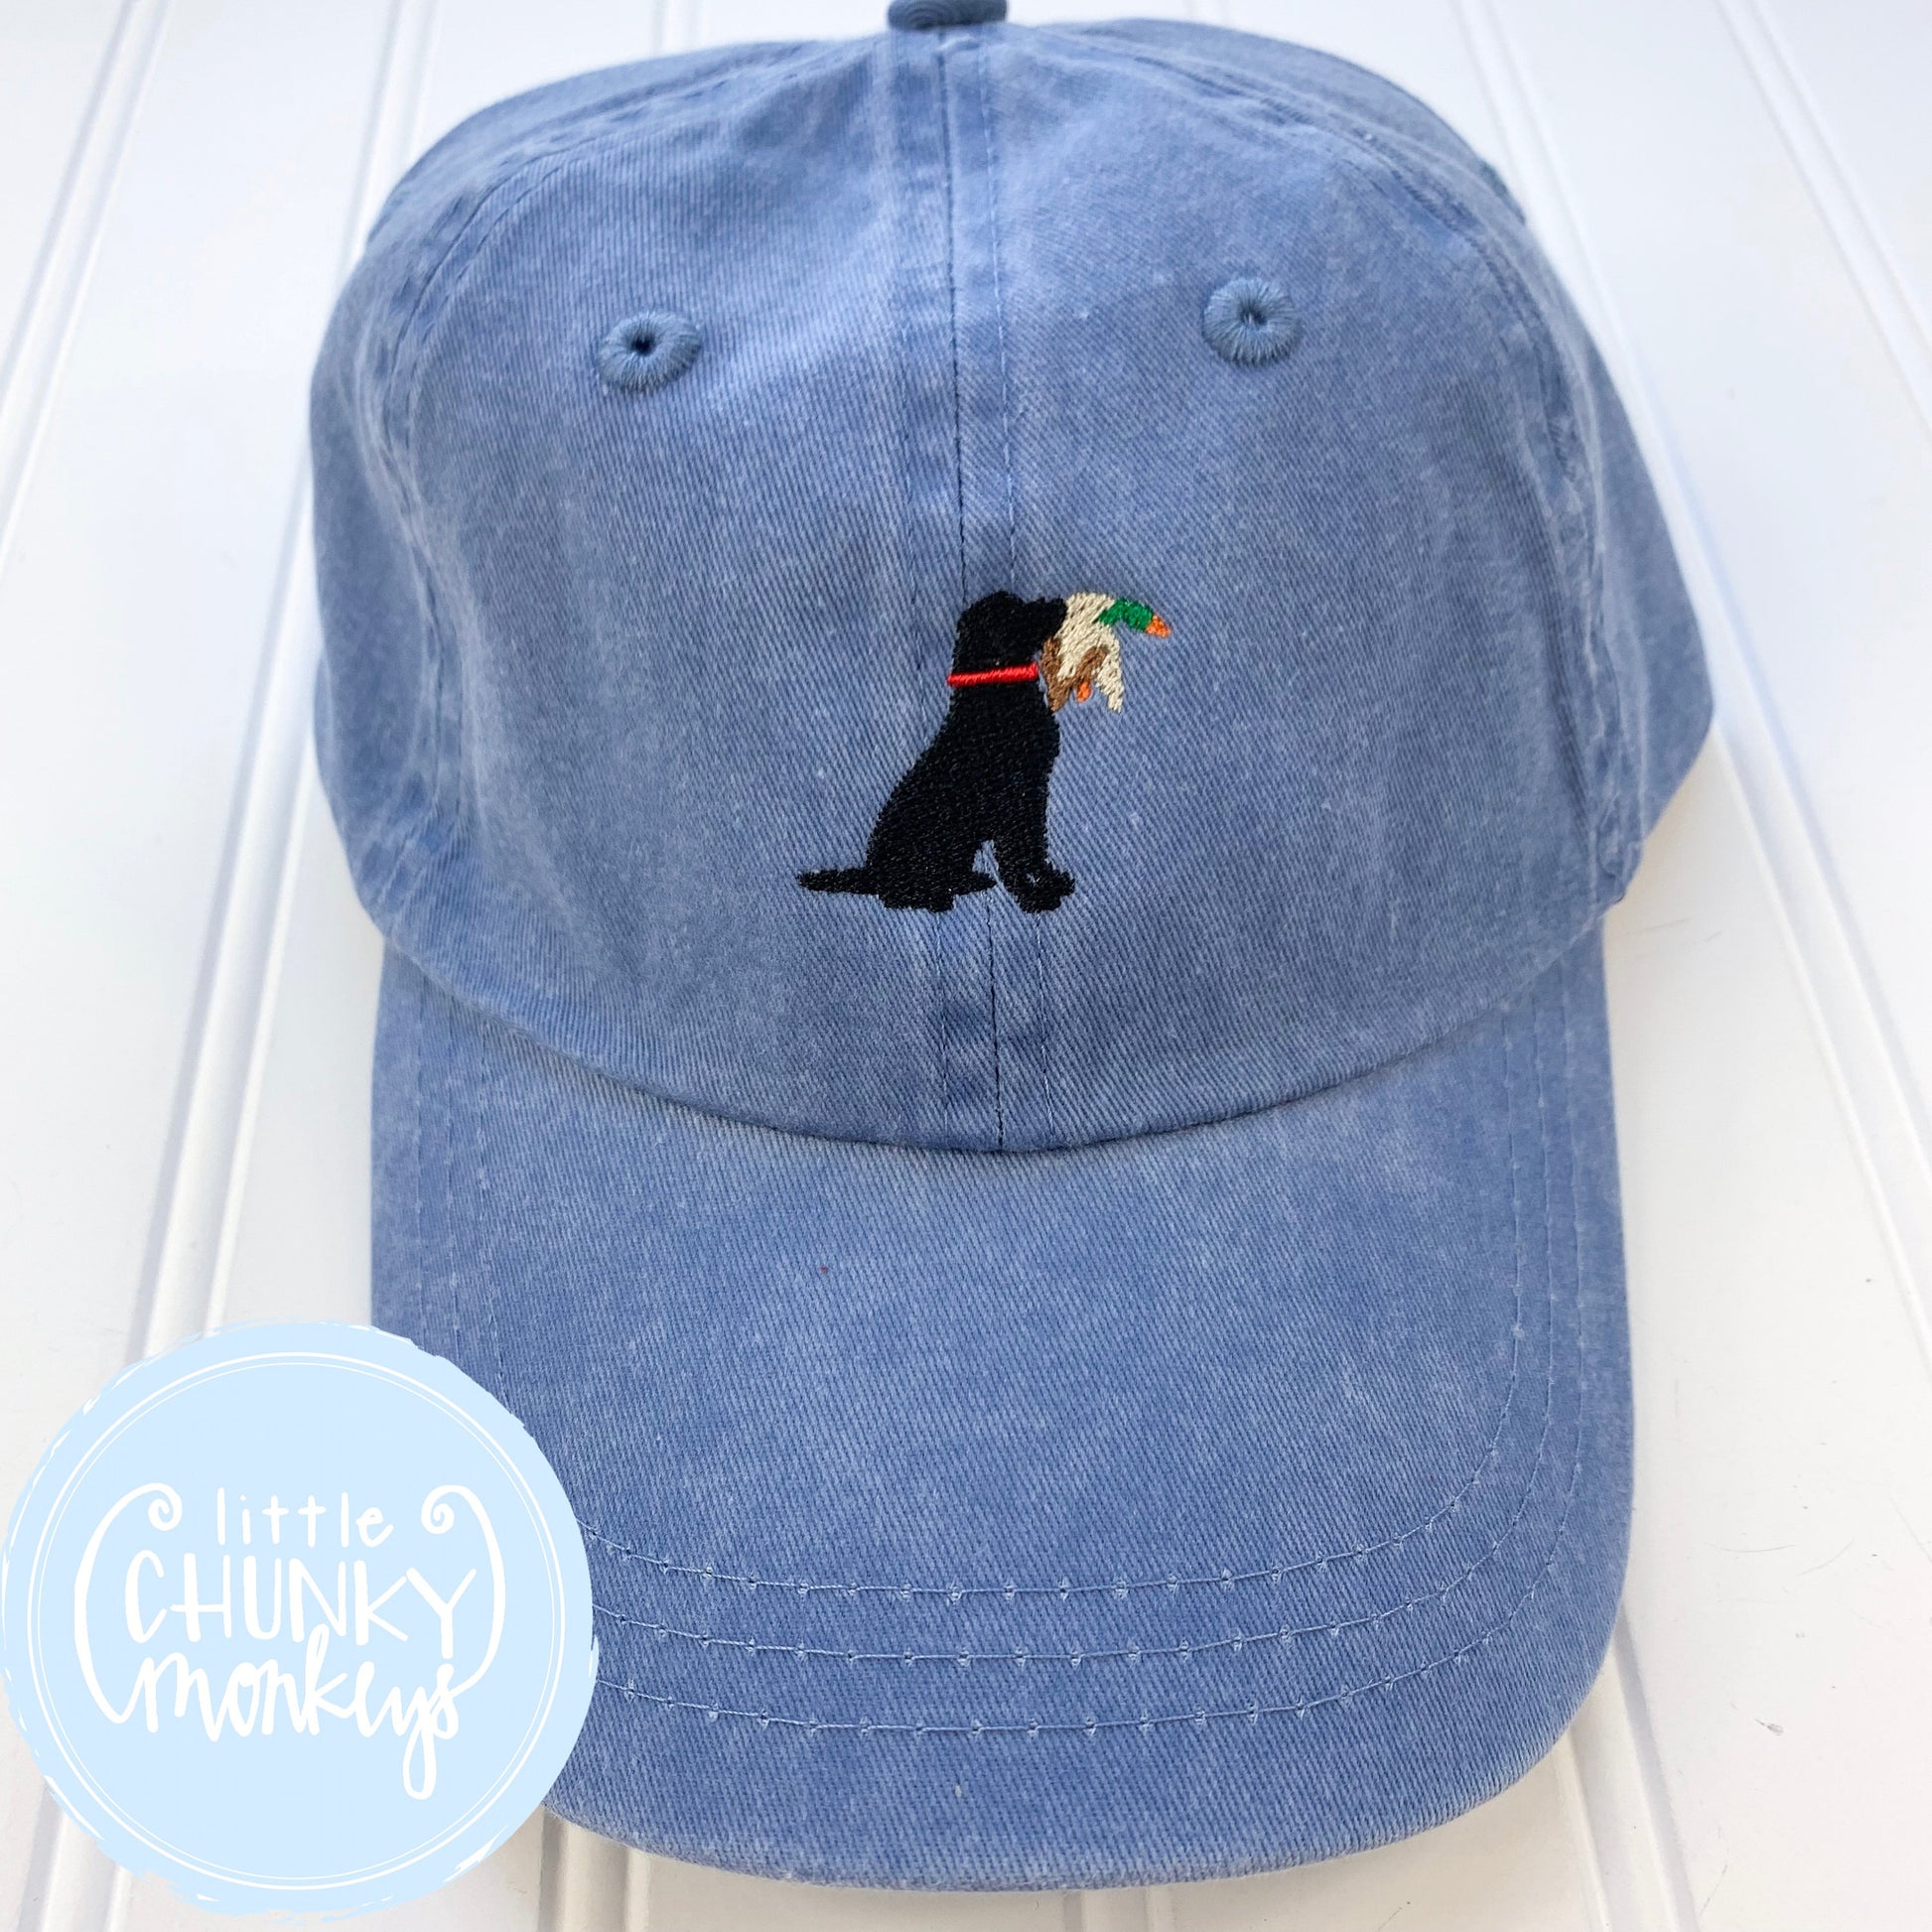 Toddler Kid Hat - Faded Baby Blue Hat with Stitched Dog with Duck in His Mouth